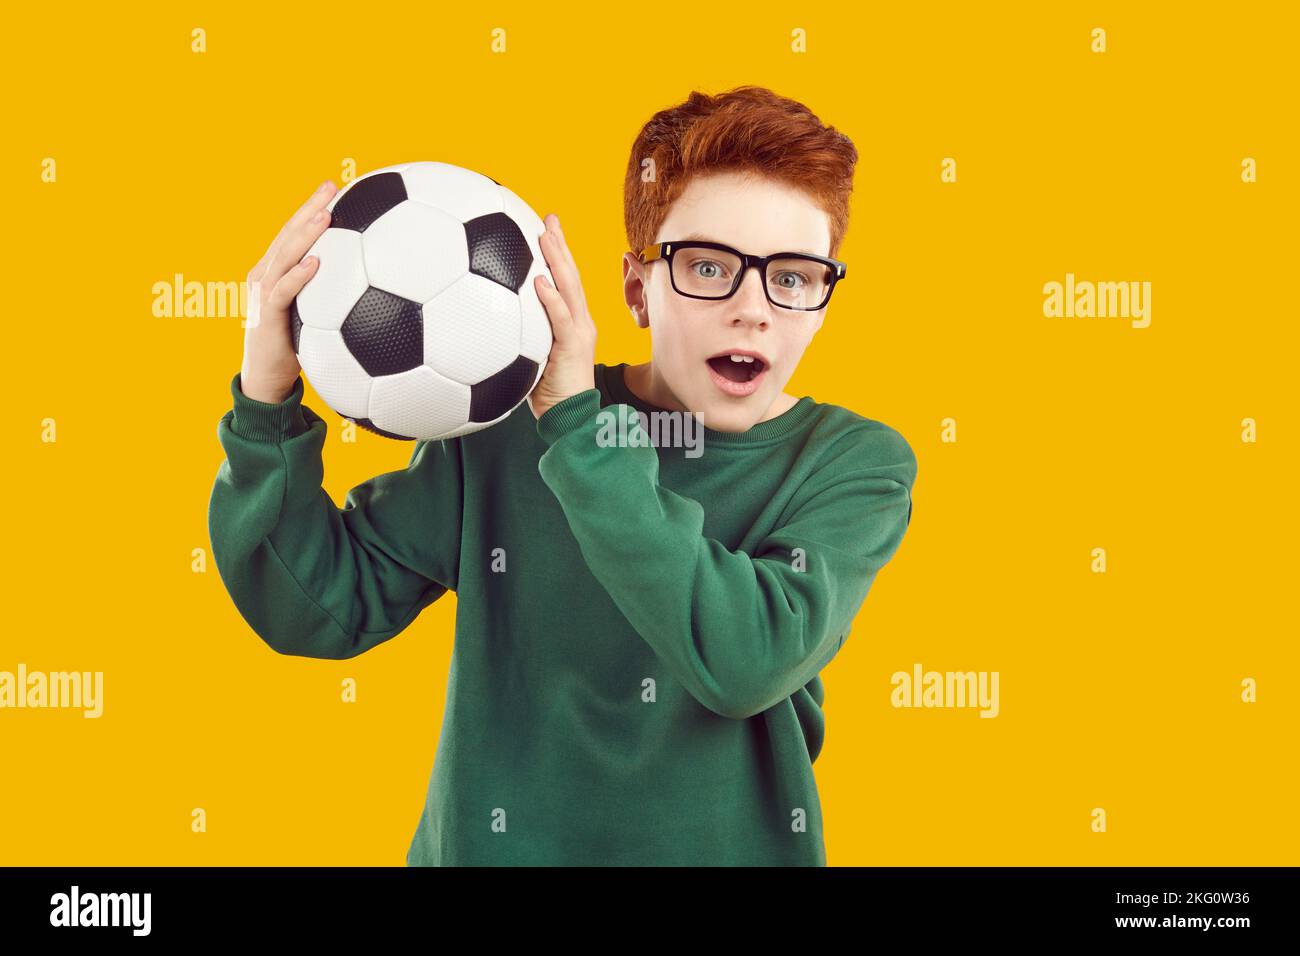 Shocked preteen boy catches black and white soccer ball, isolated on orange background. Stock Photo